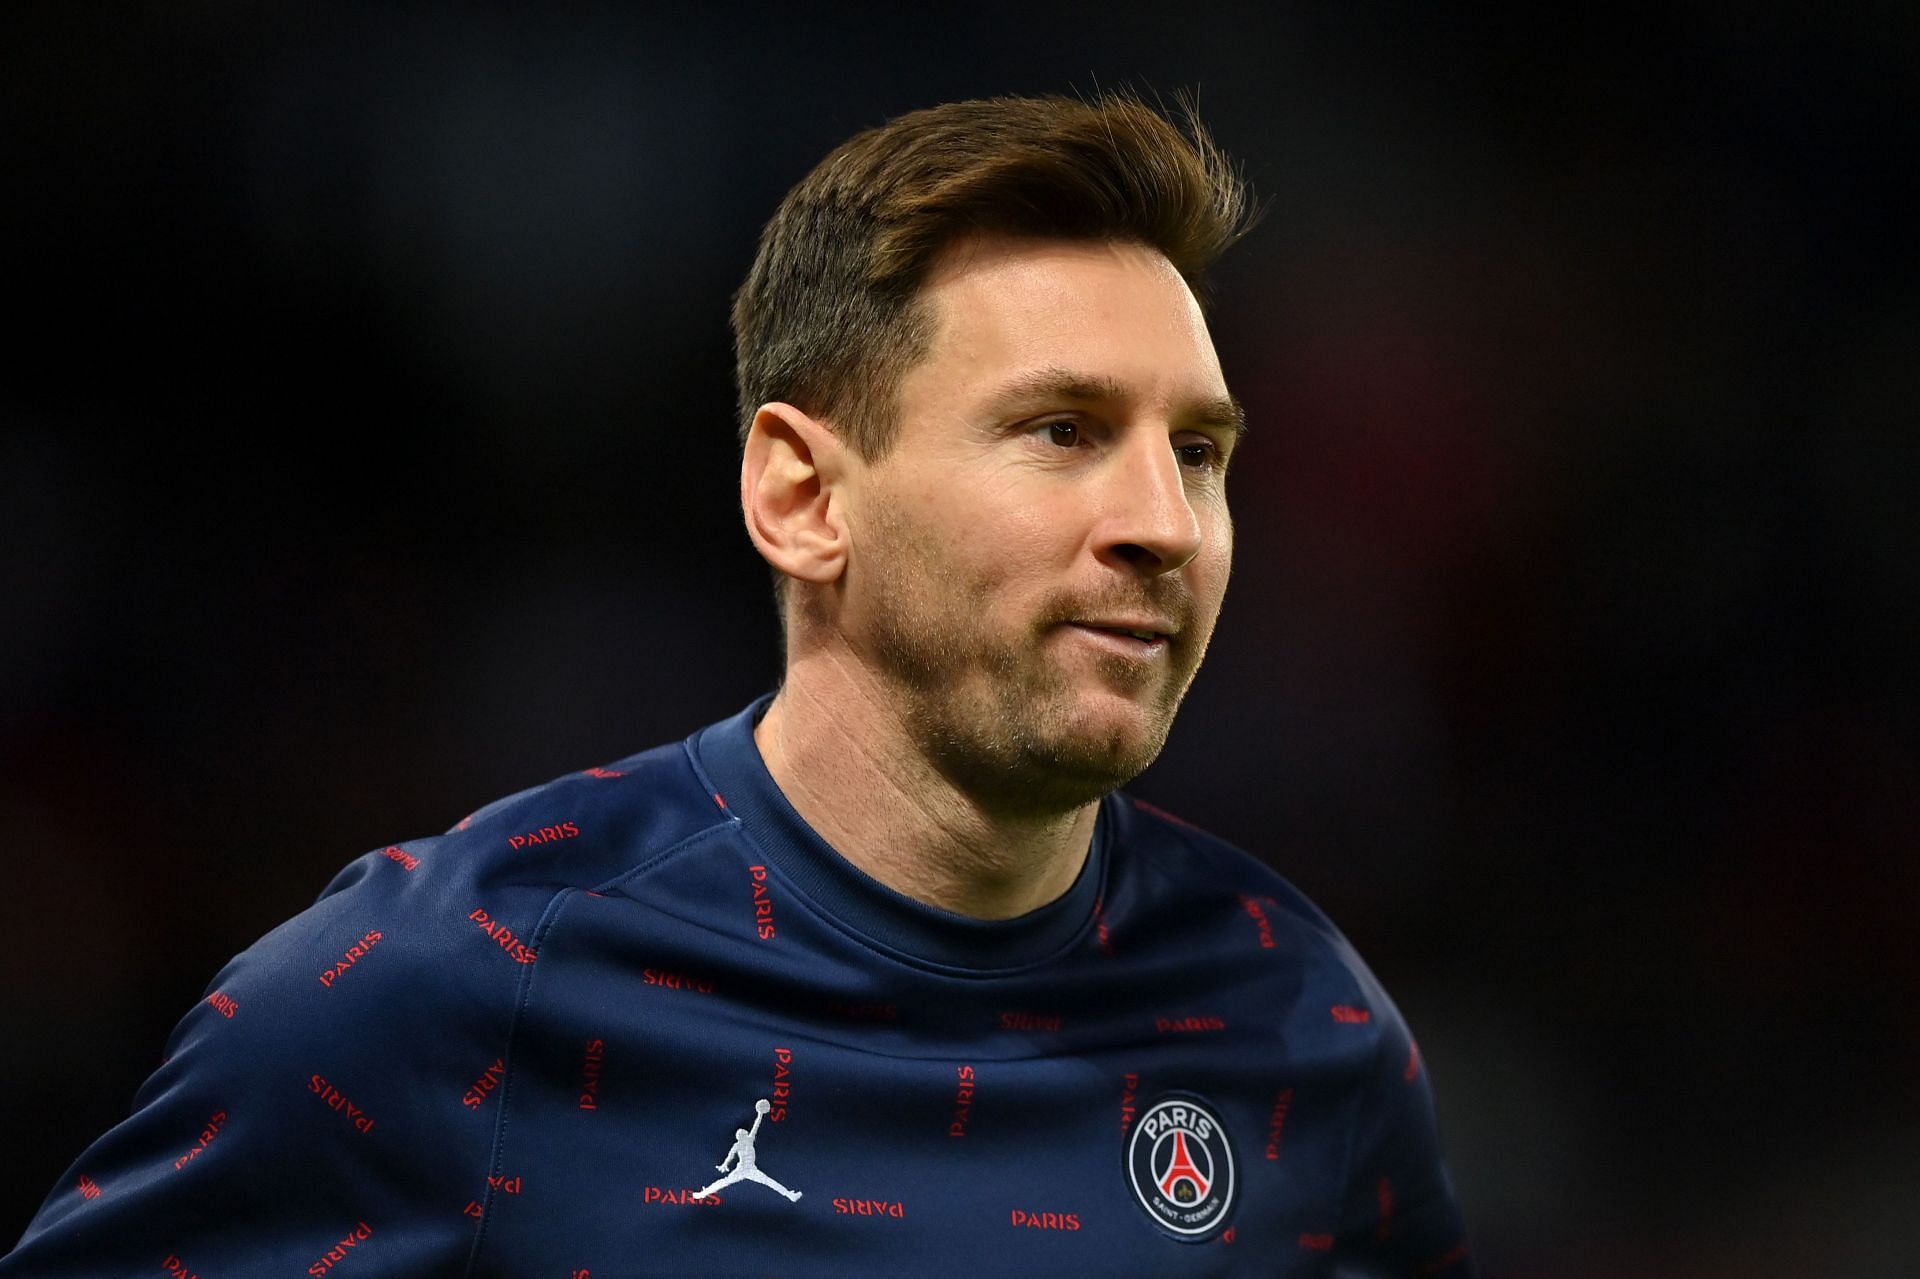 Lionel Messi has scored three Champions League goals for PSG this season